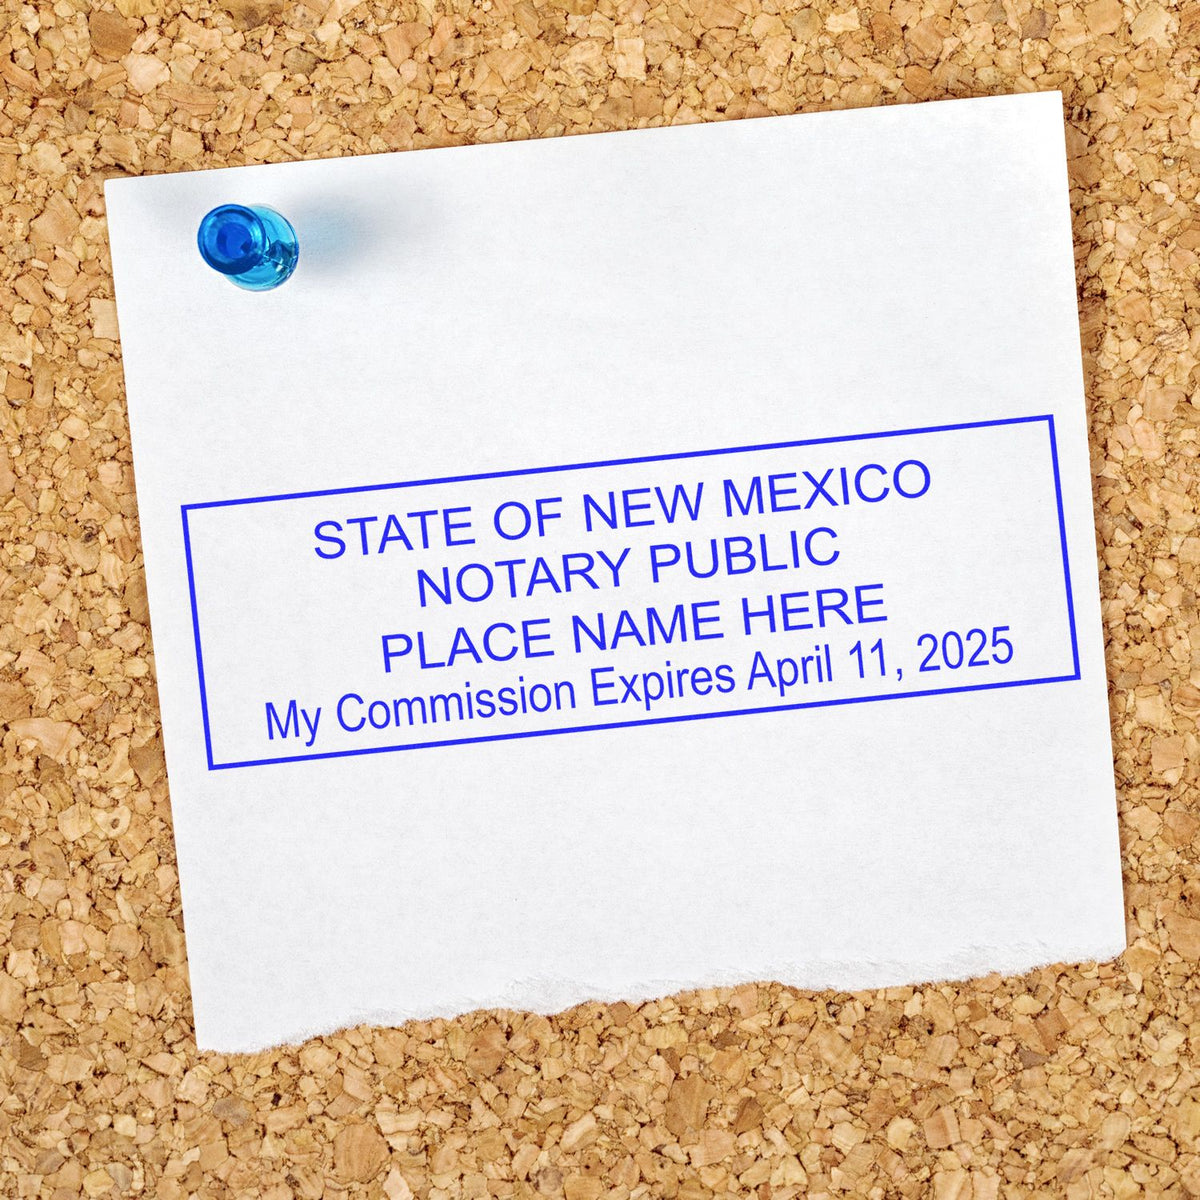 An alternative view of the Heavy-Duty New Mexico Rectangular Notary Stamp stamped on a sheet of paper showing the image in use